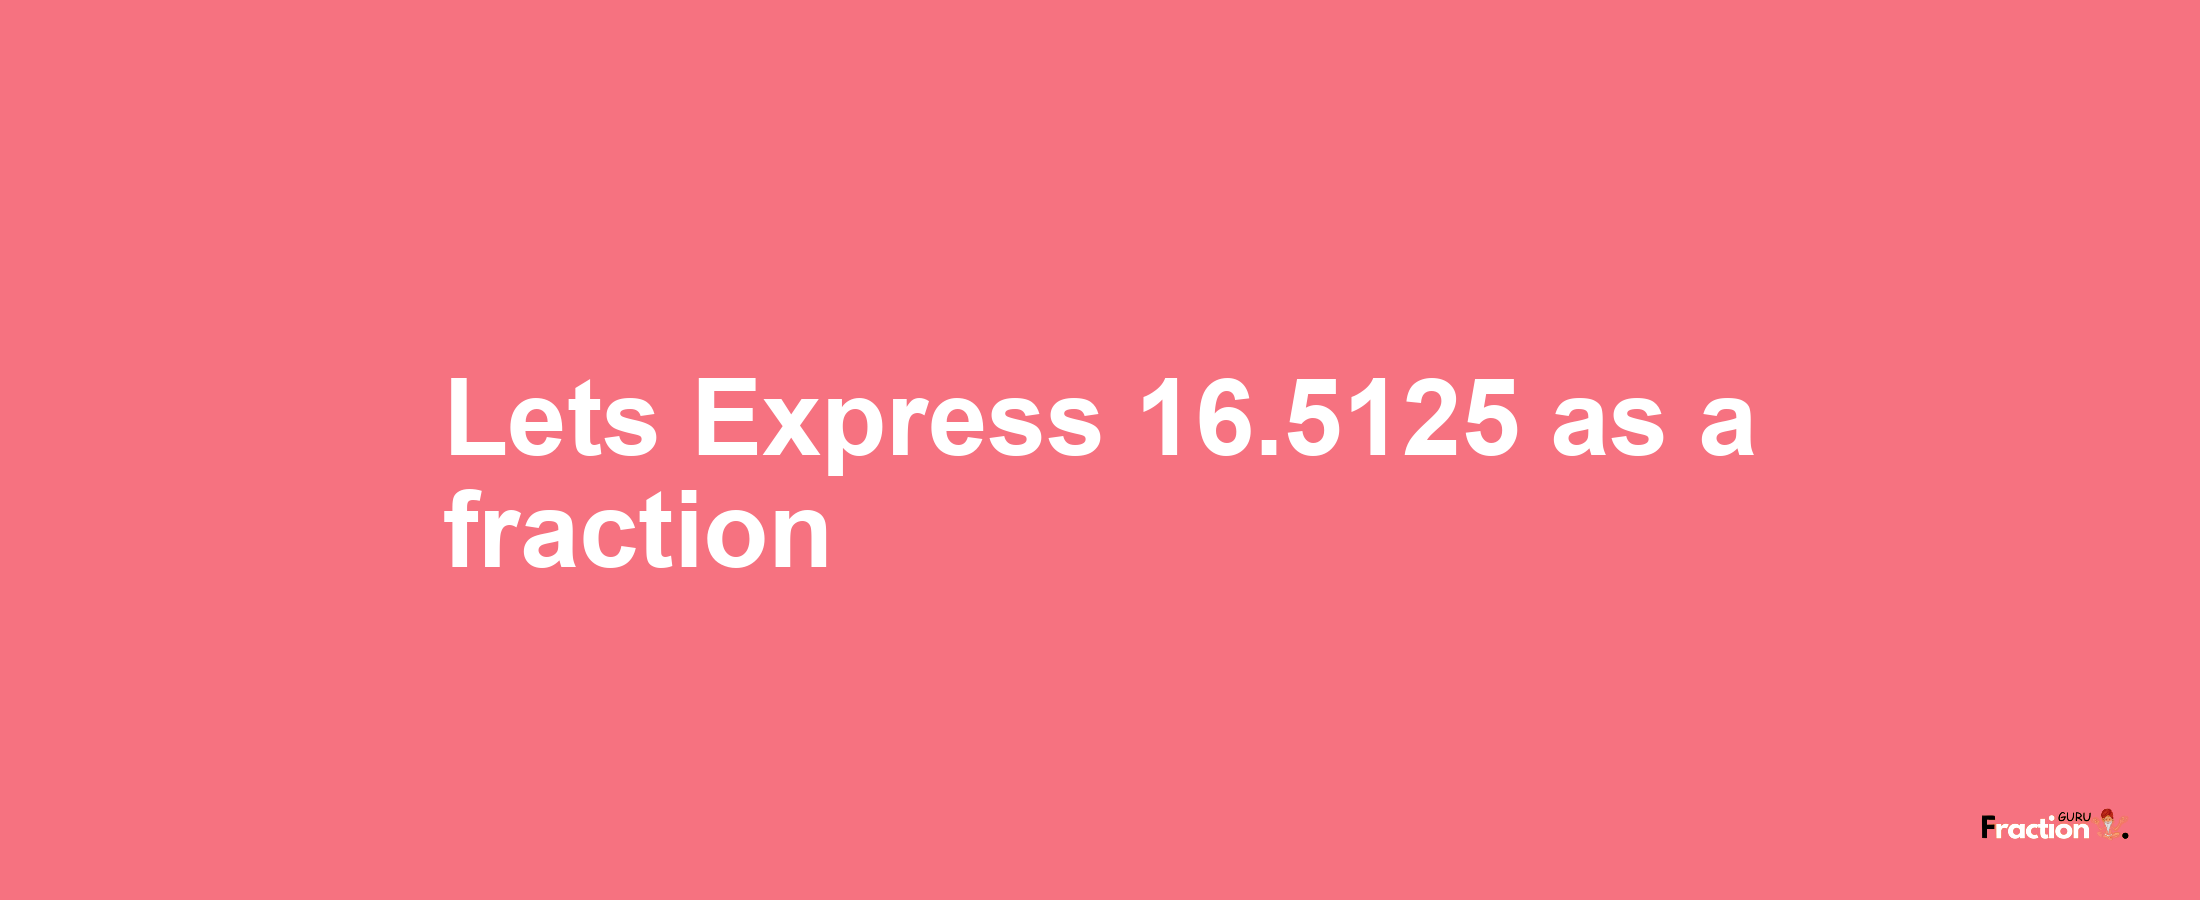 Lets Express 16.5125 as afraction